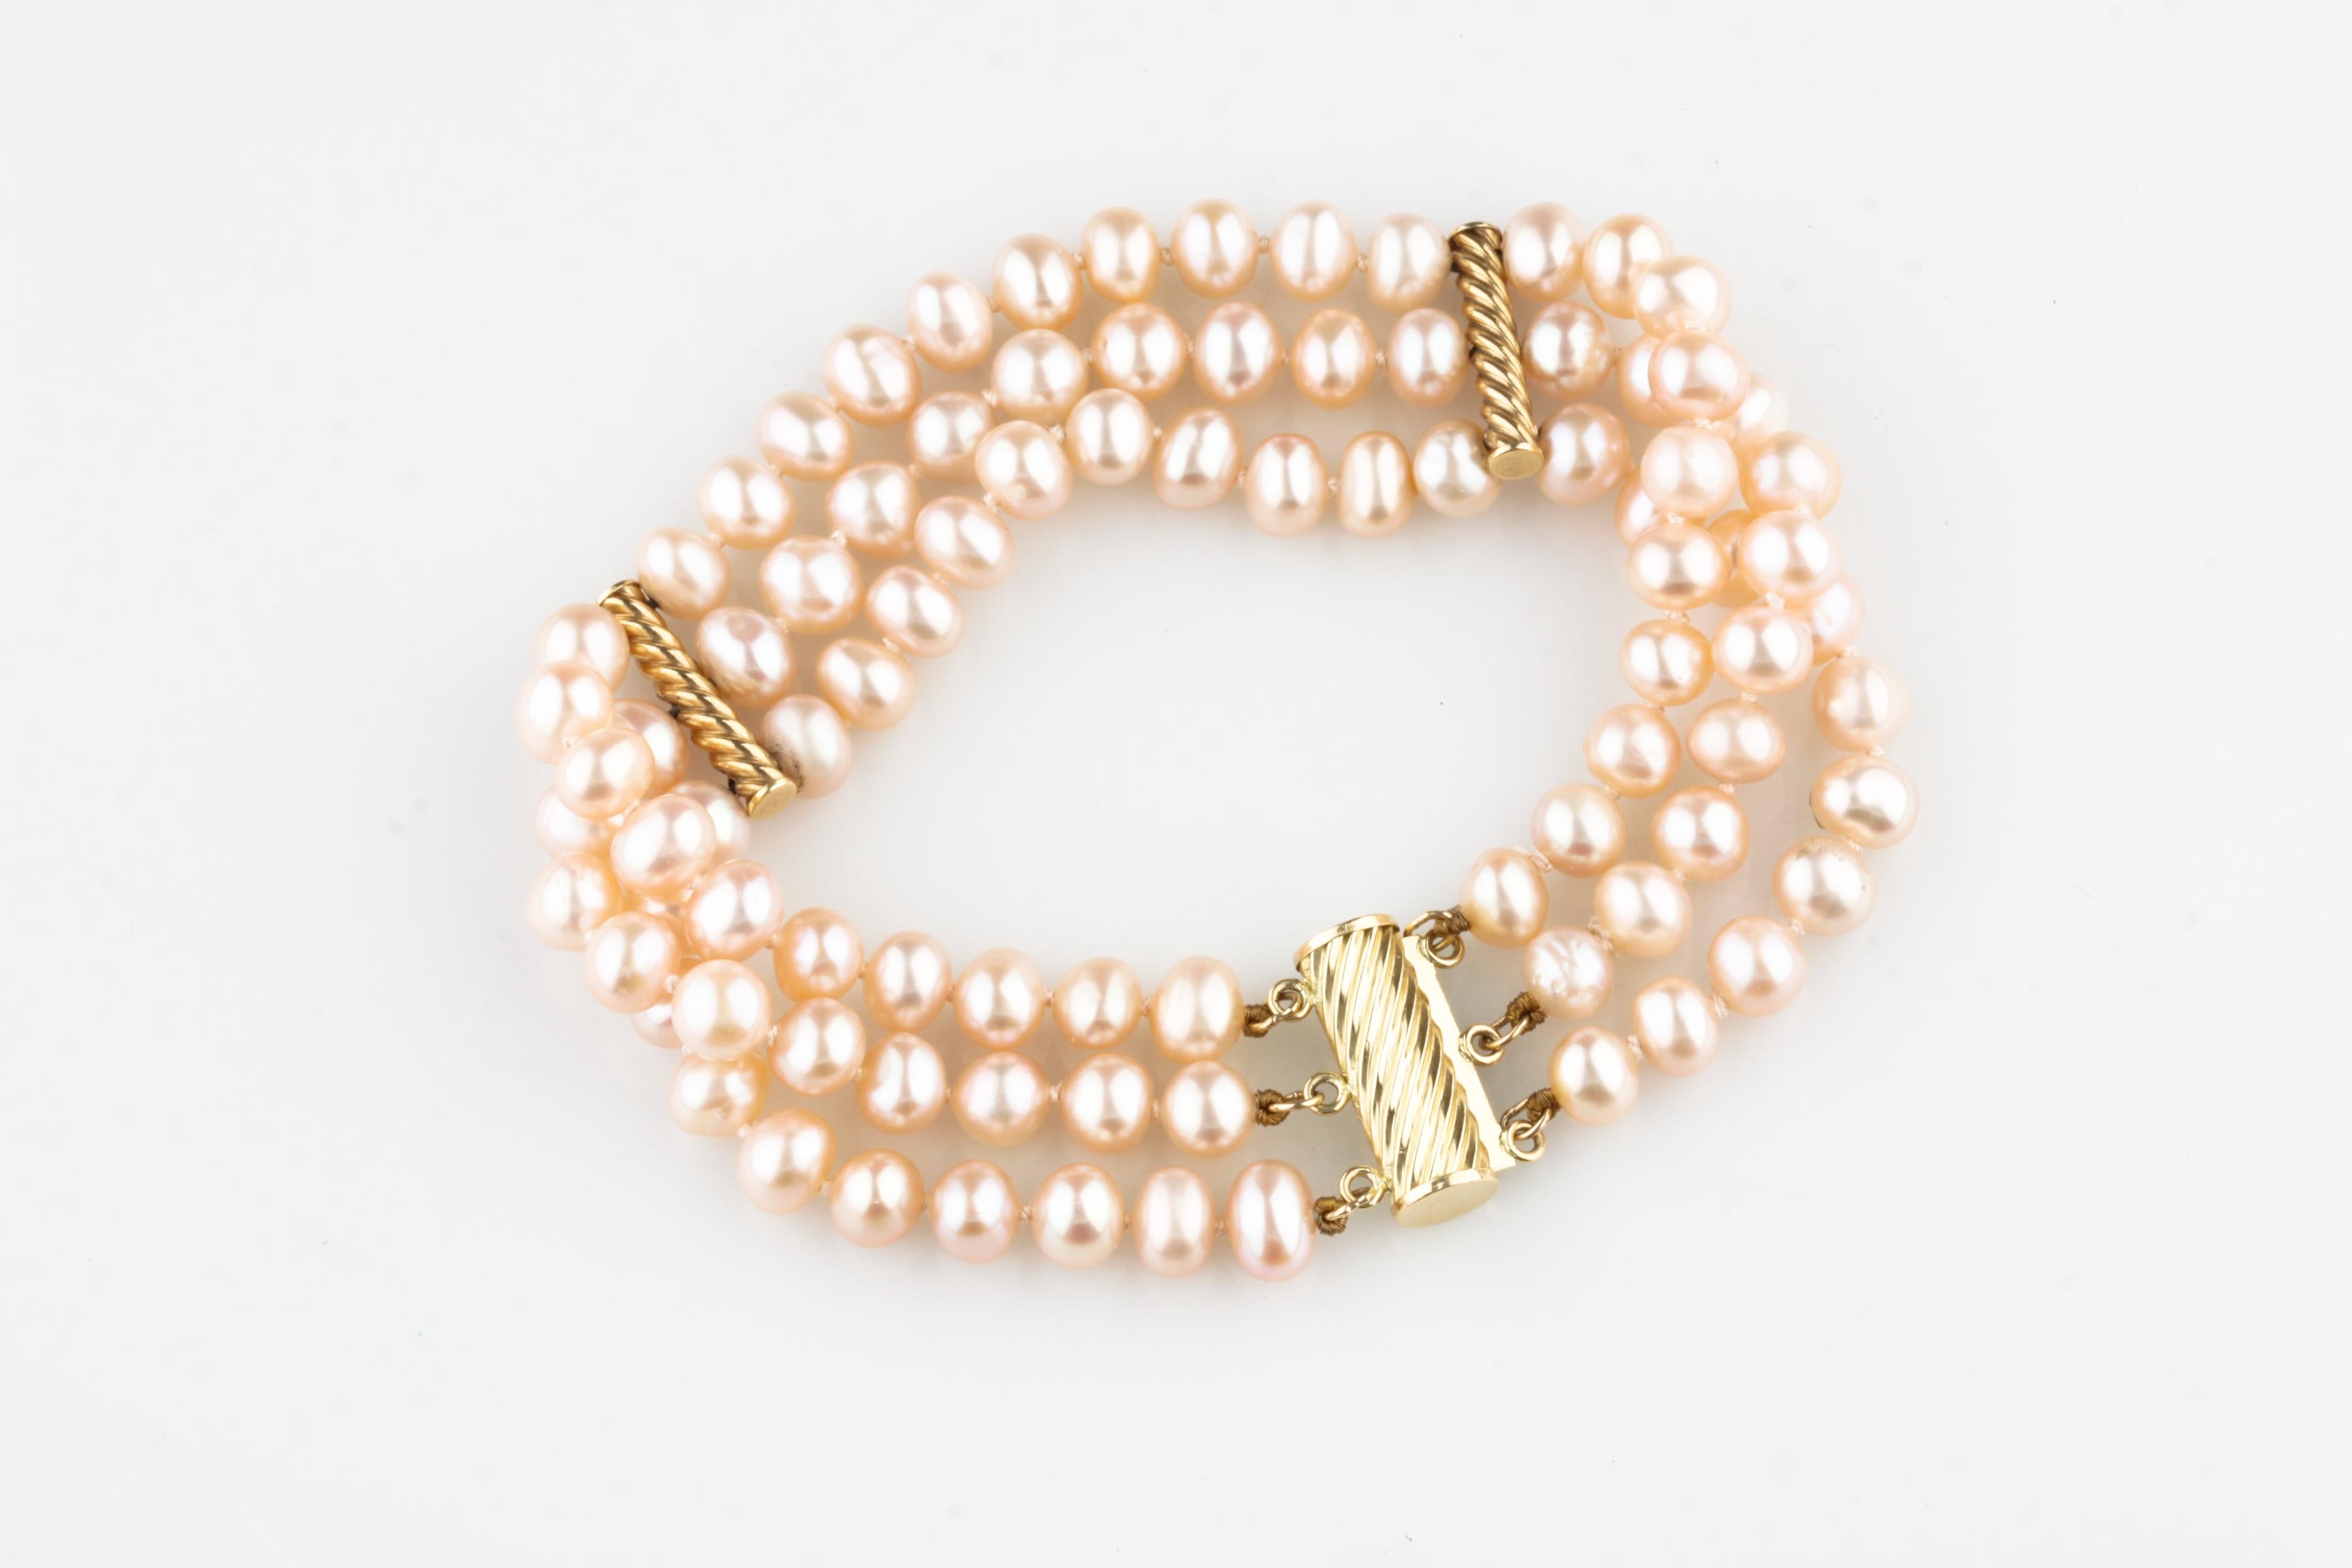 Gorgeous Three-Strand Pearl Bracelet
Features Slightly Asymmetrical Pearl Beads
Pinkish, Silver Pearlescence
Average Diameter of Pearls = 5 - 6 mm
Includes 14k Yellow Gold Twist Accents and Clasp
Total Mass = 25.2 grams
Total Length = 7.5